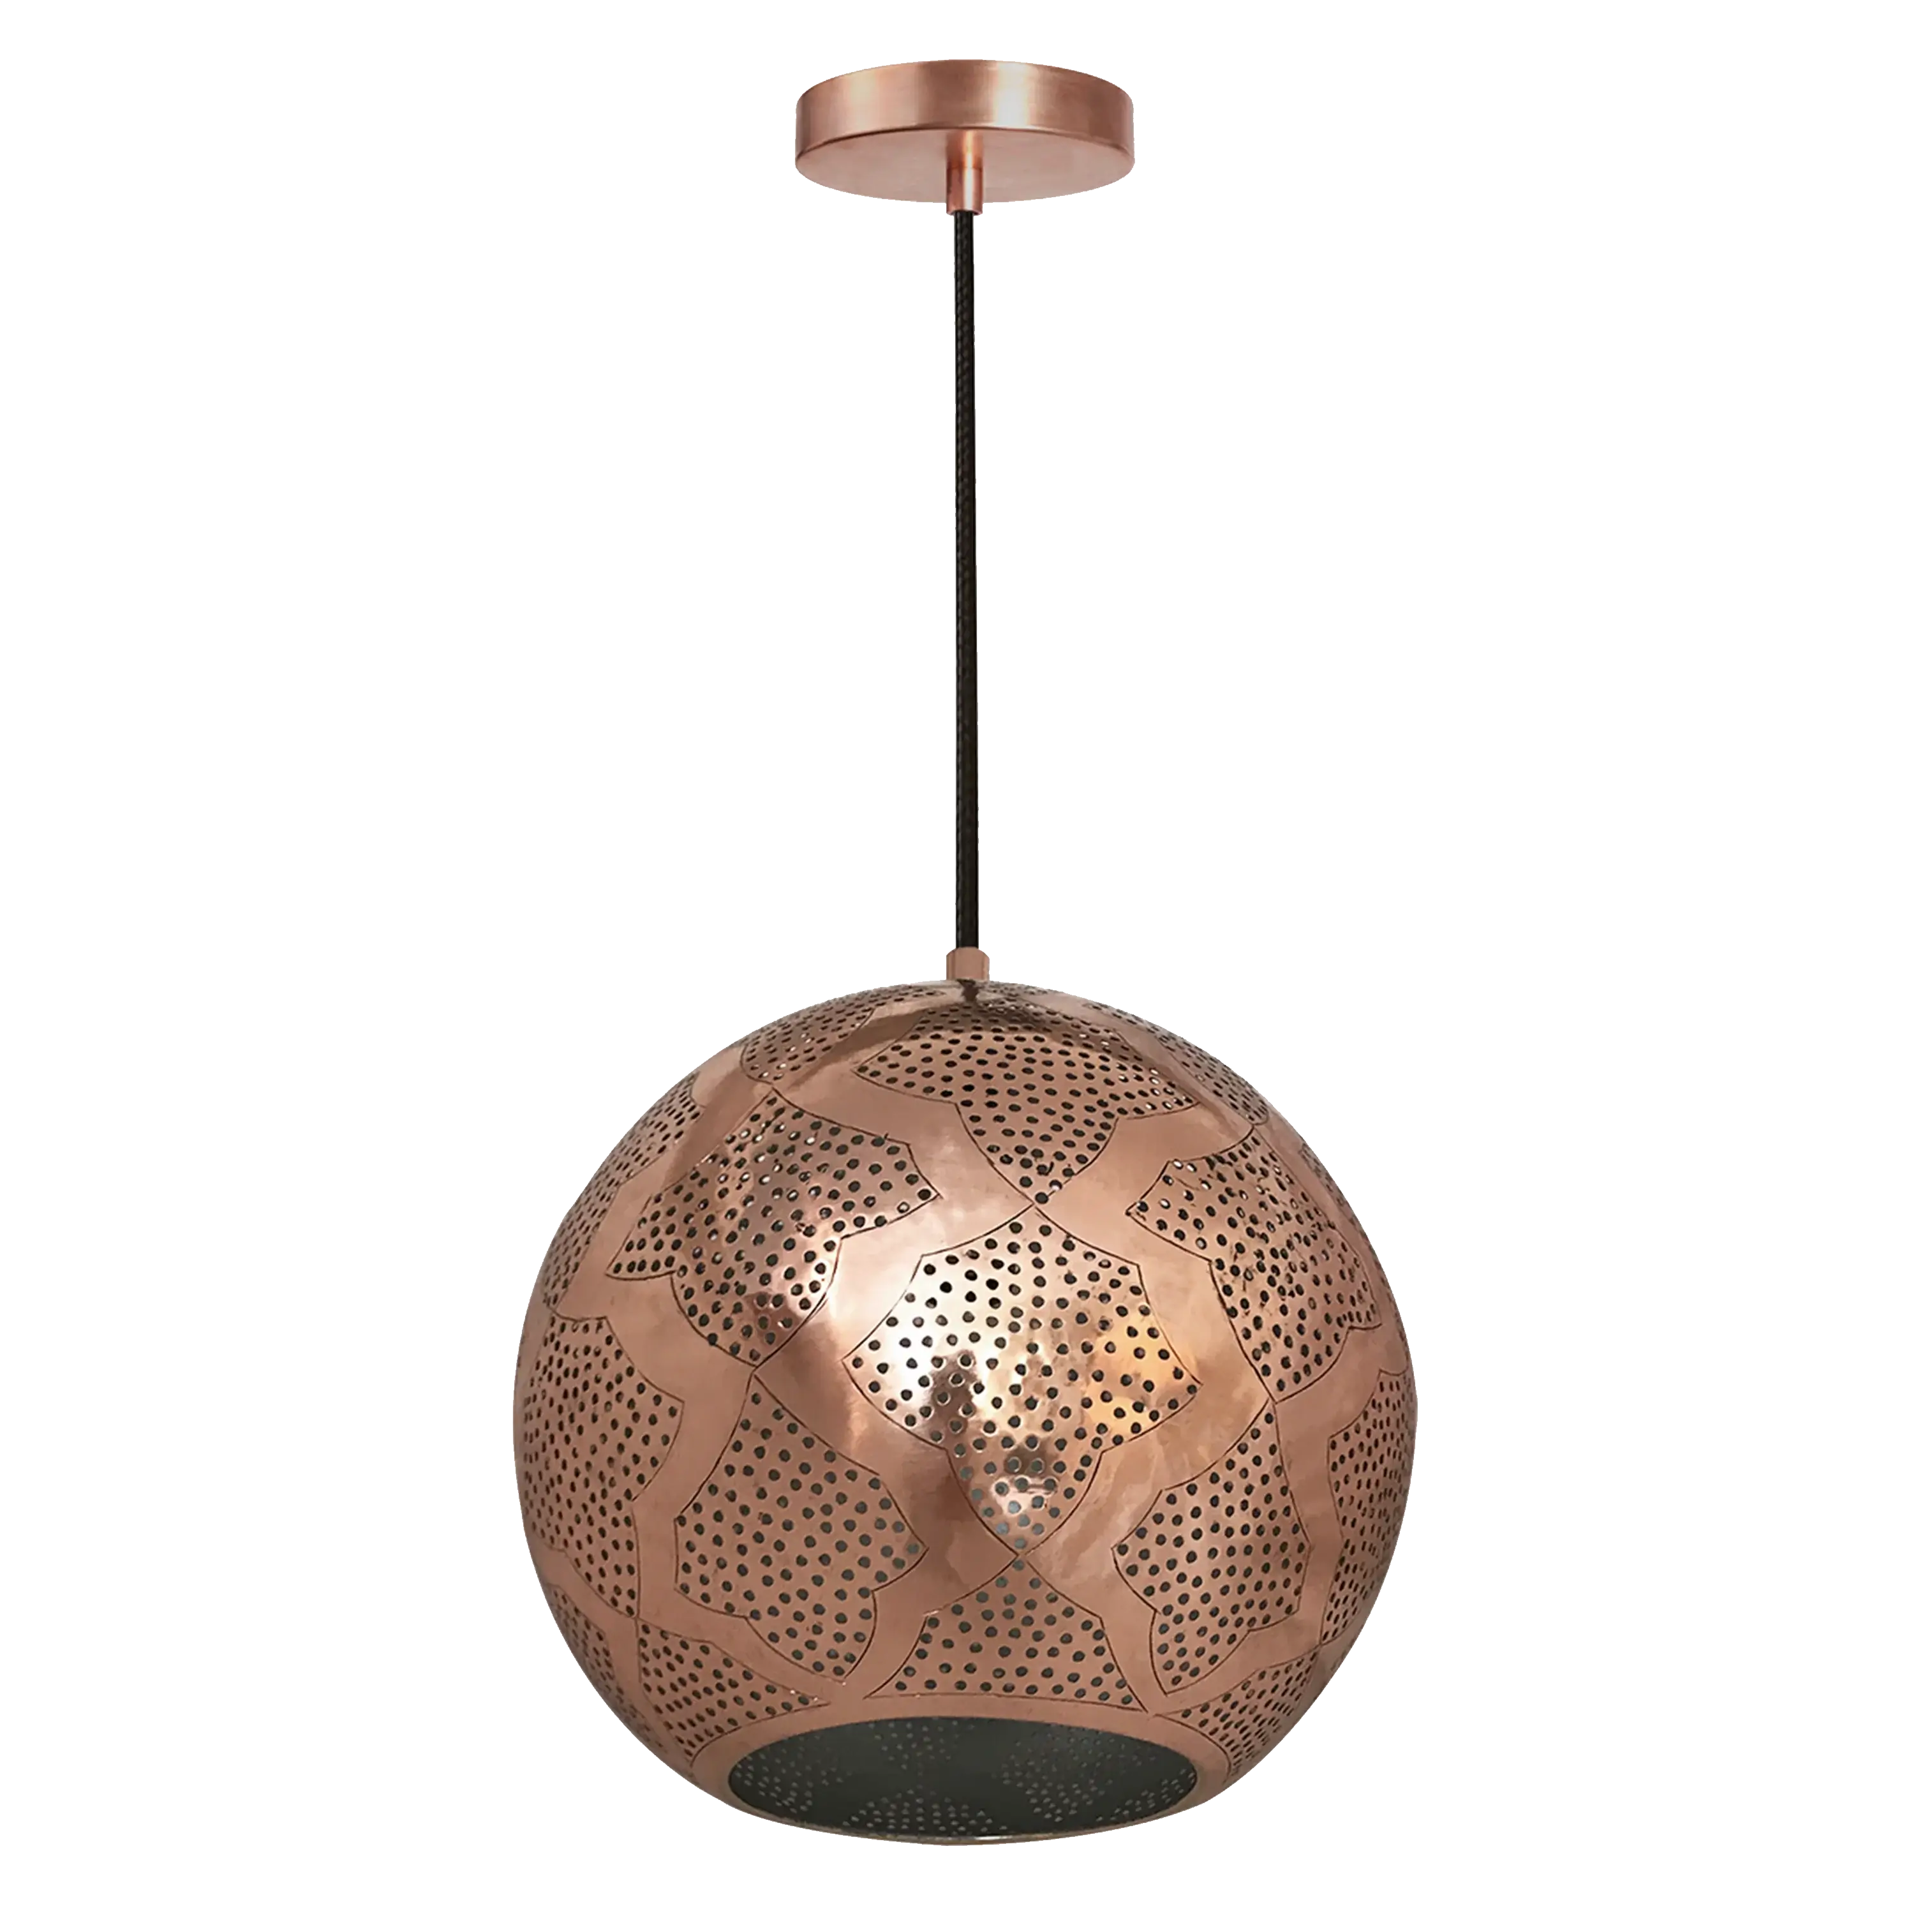 Dounia home Pendant light in Polished copper  made of Metal, Model: Warda